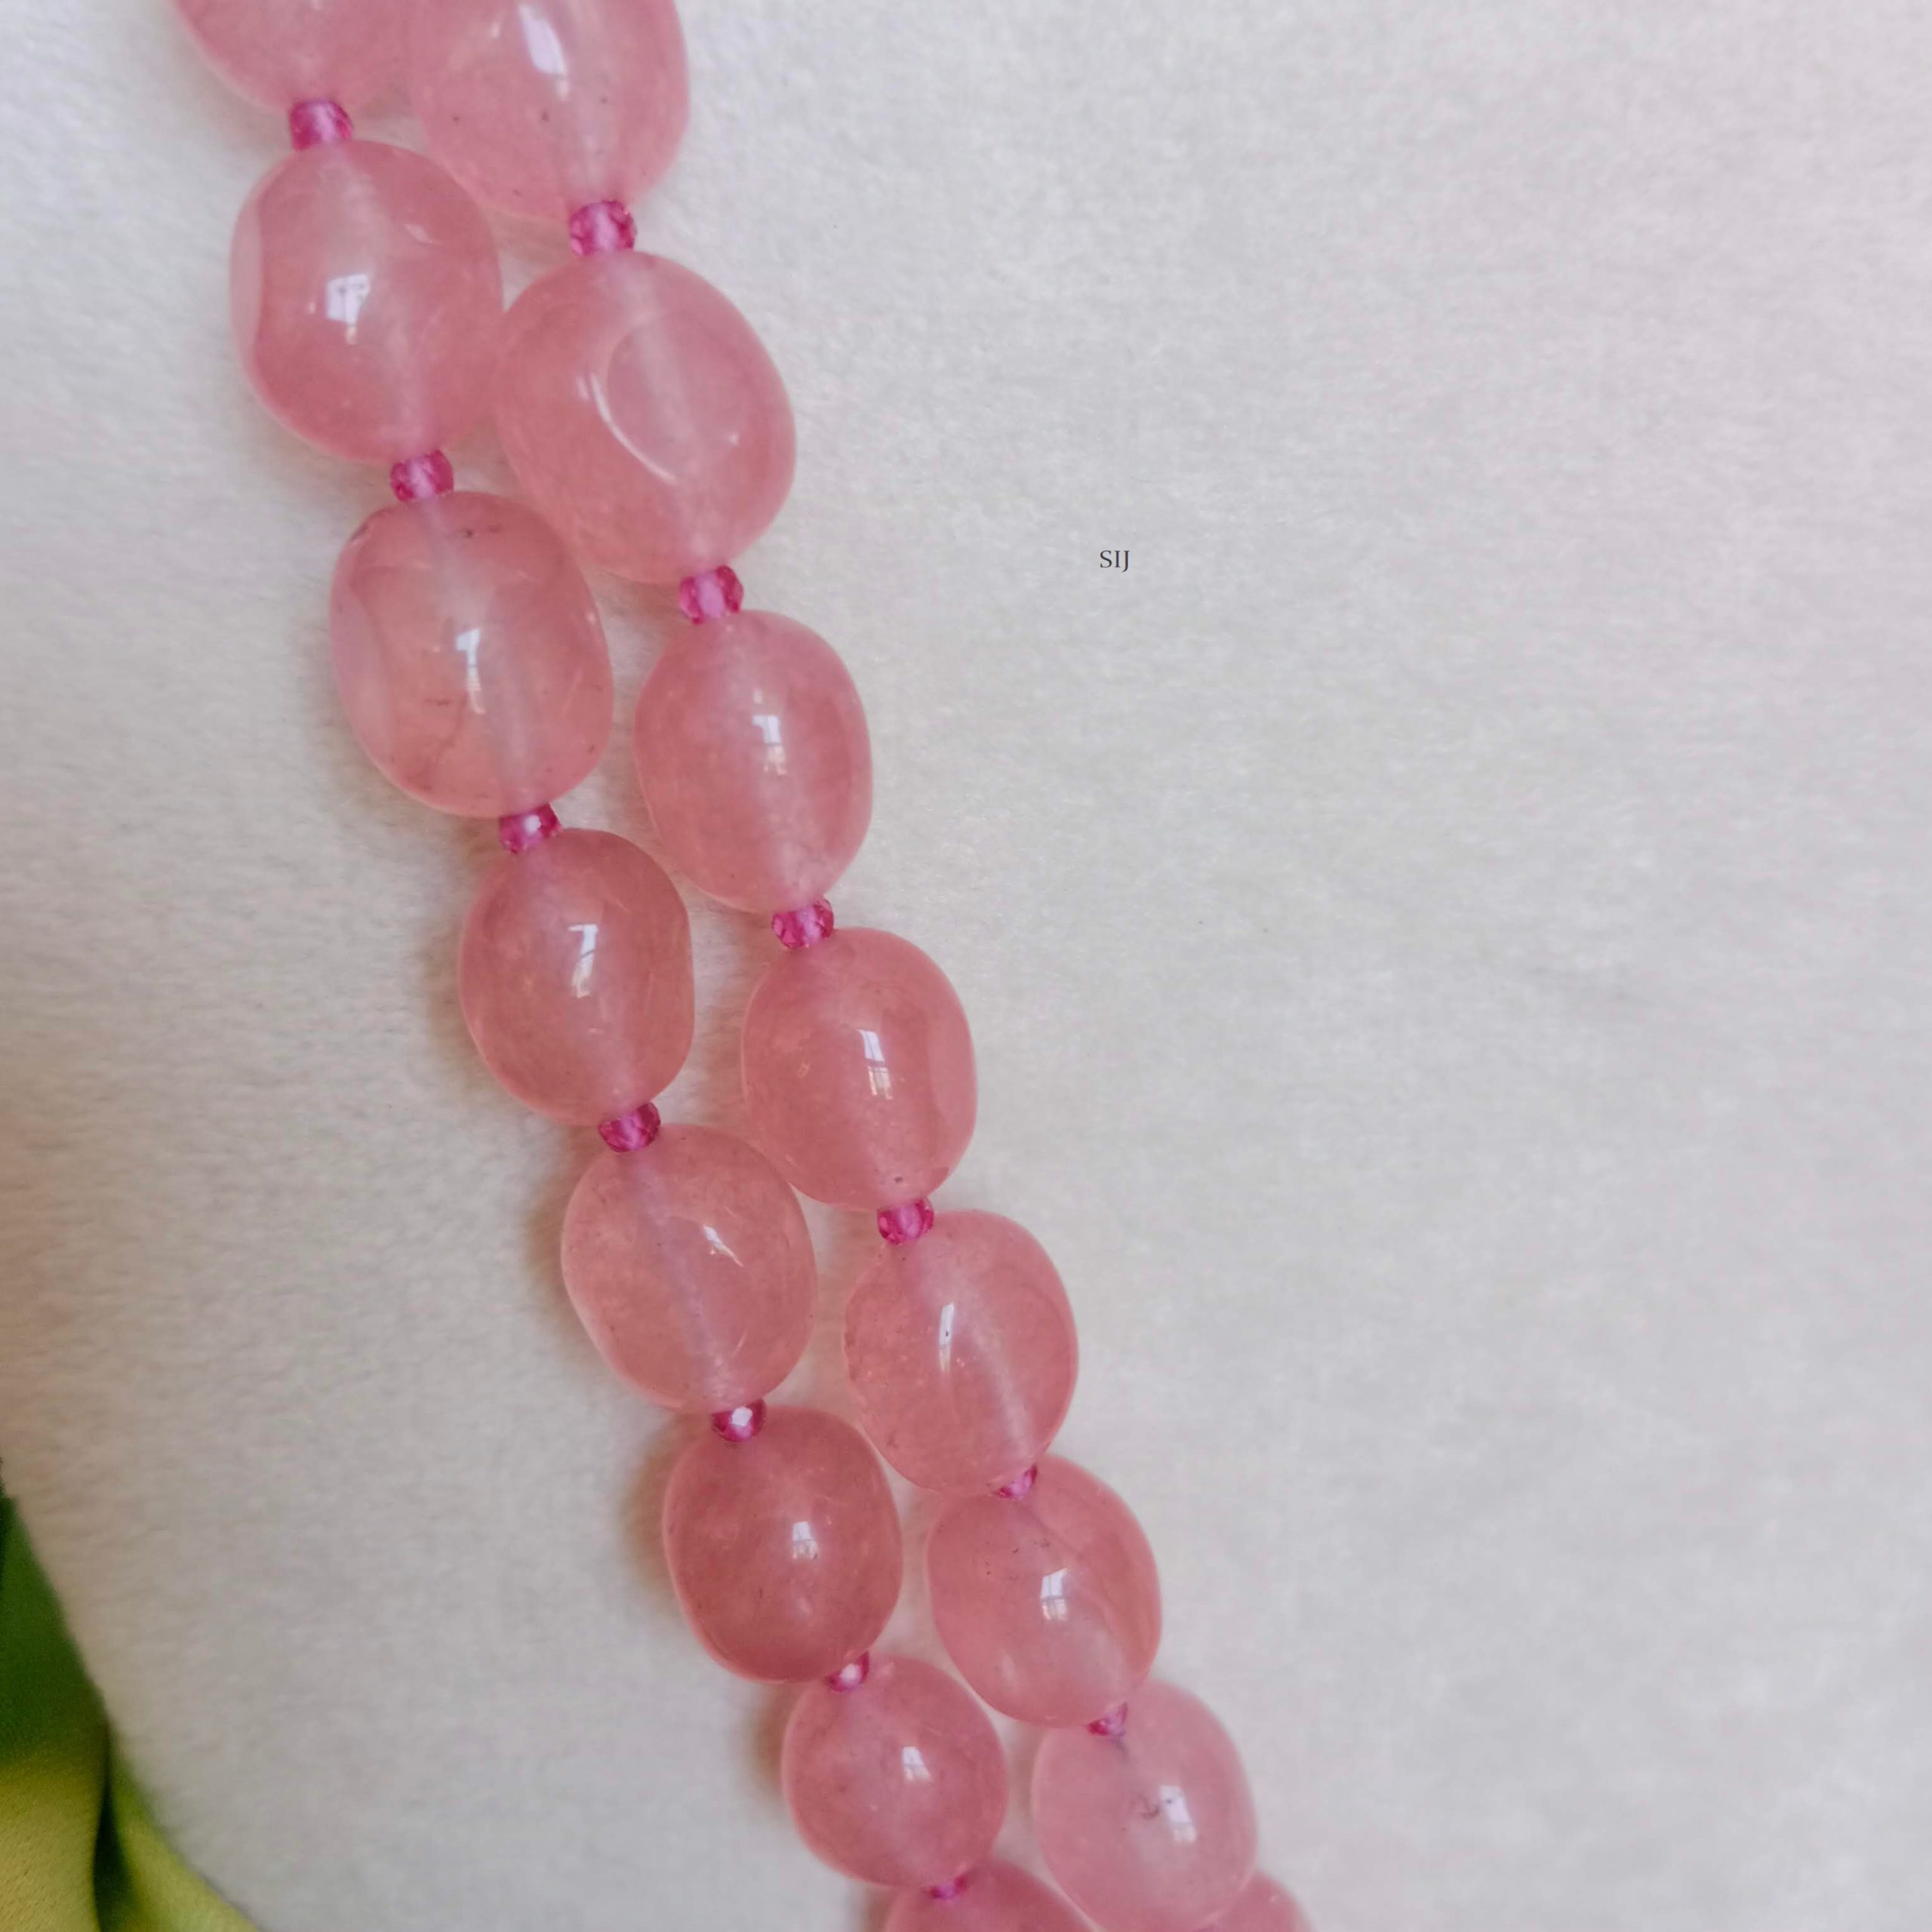 Imitation Two Layers Pink Beads Necklace